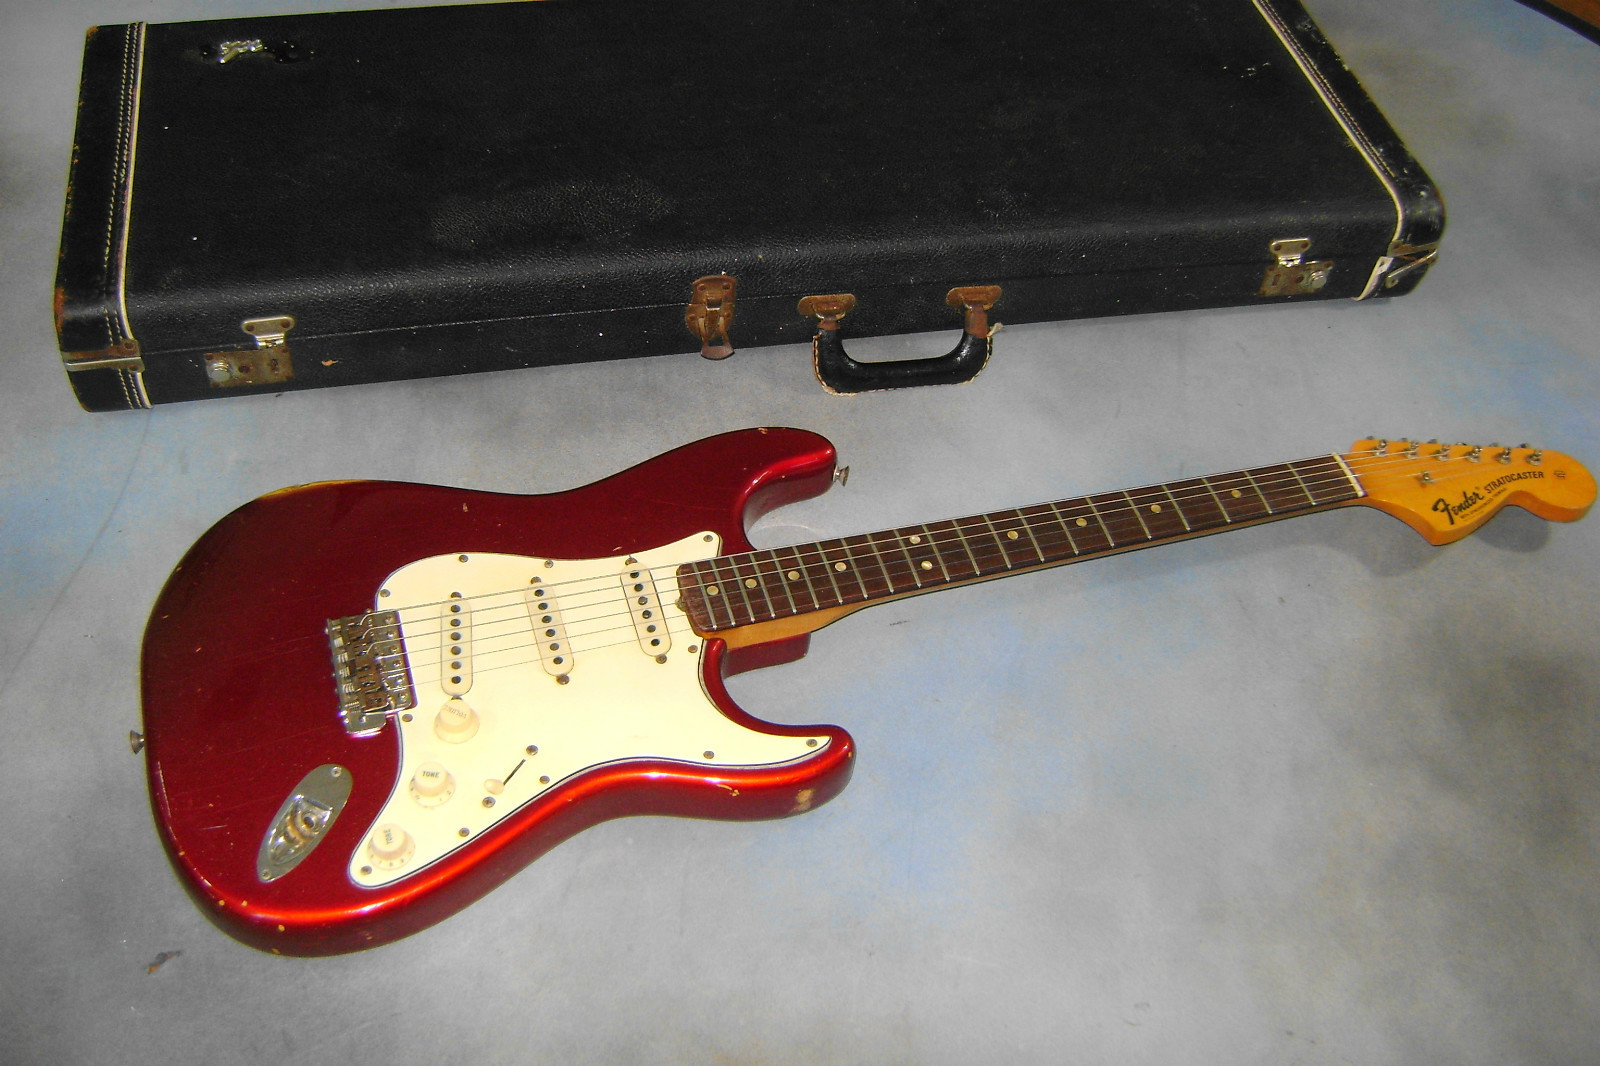 1968 Stratocaster - Candy Apple Red ~ Stratocaster Guitar Culture